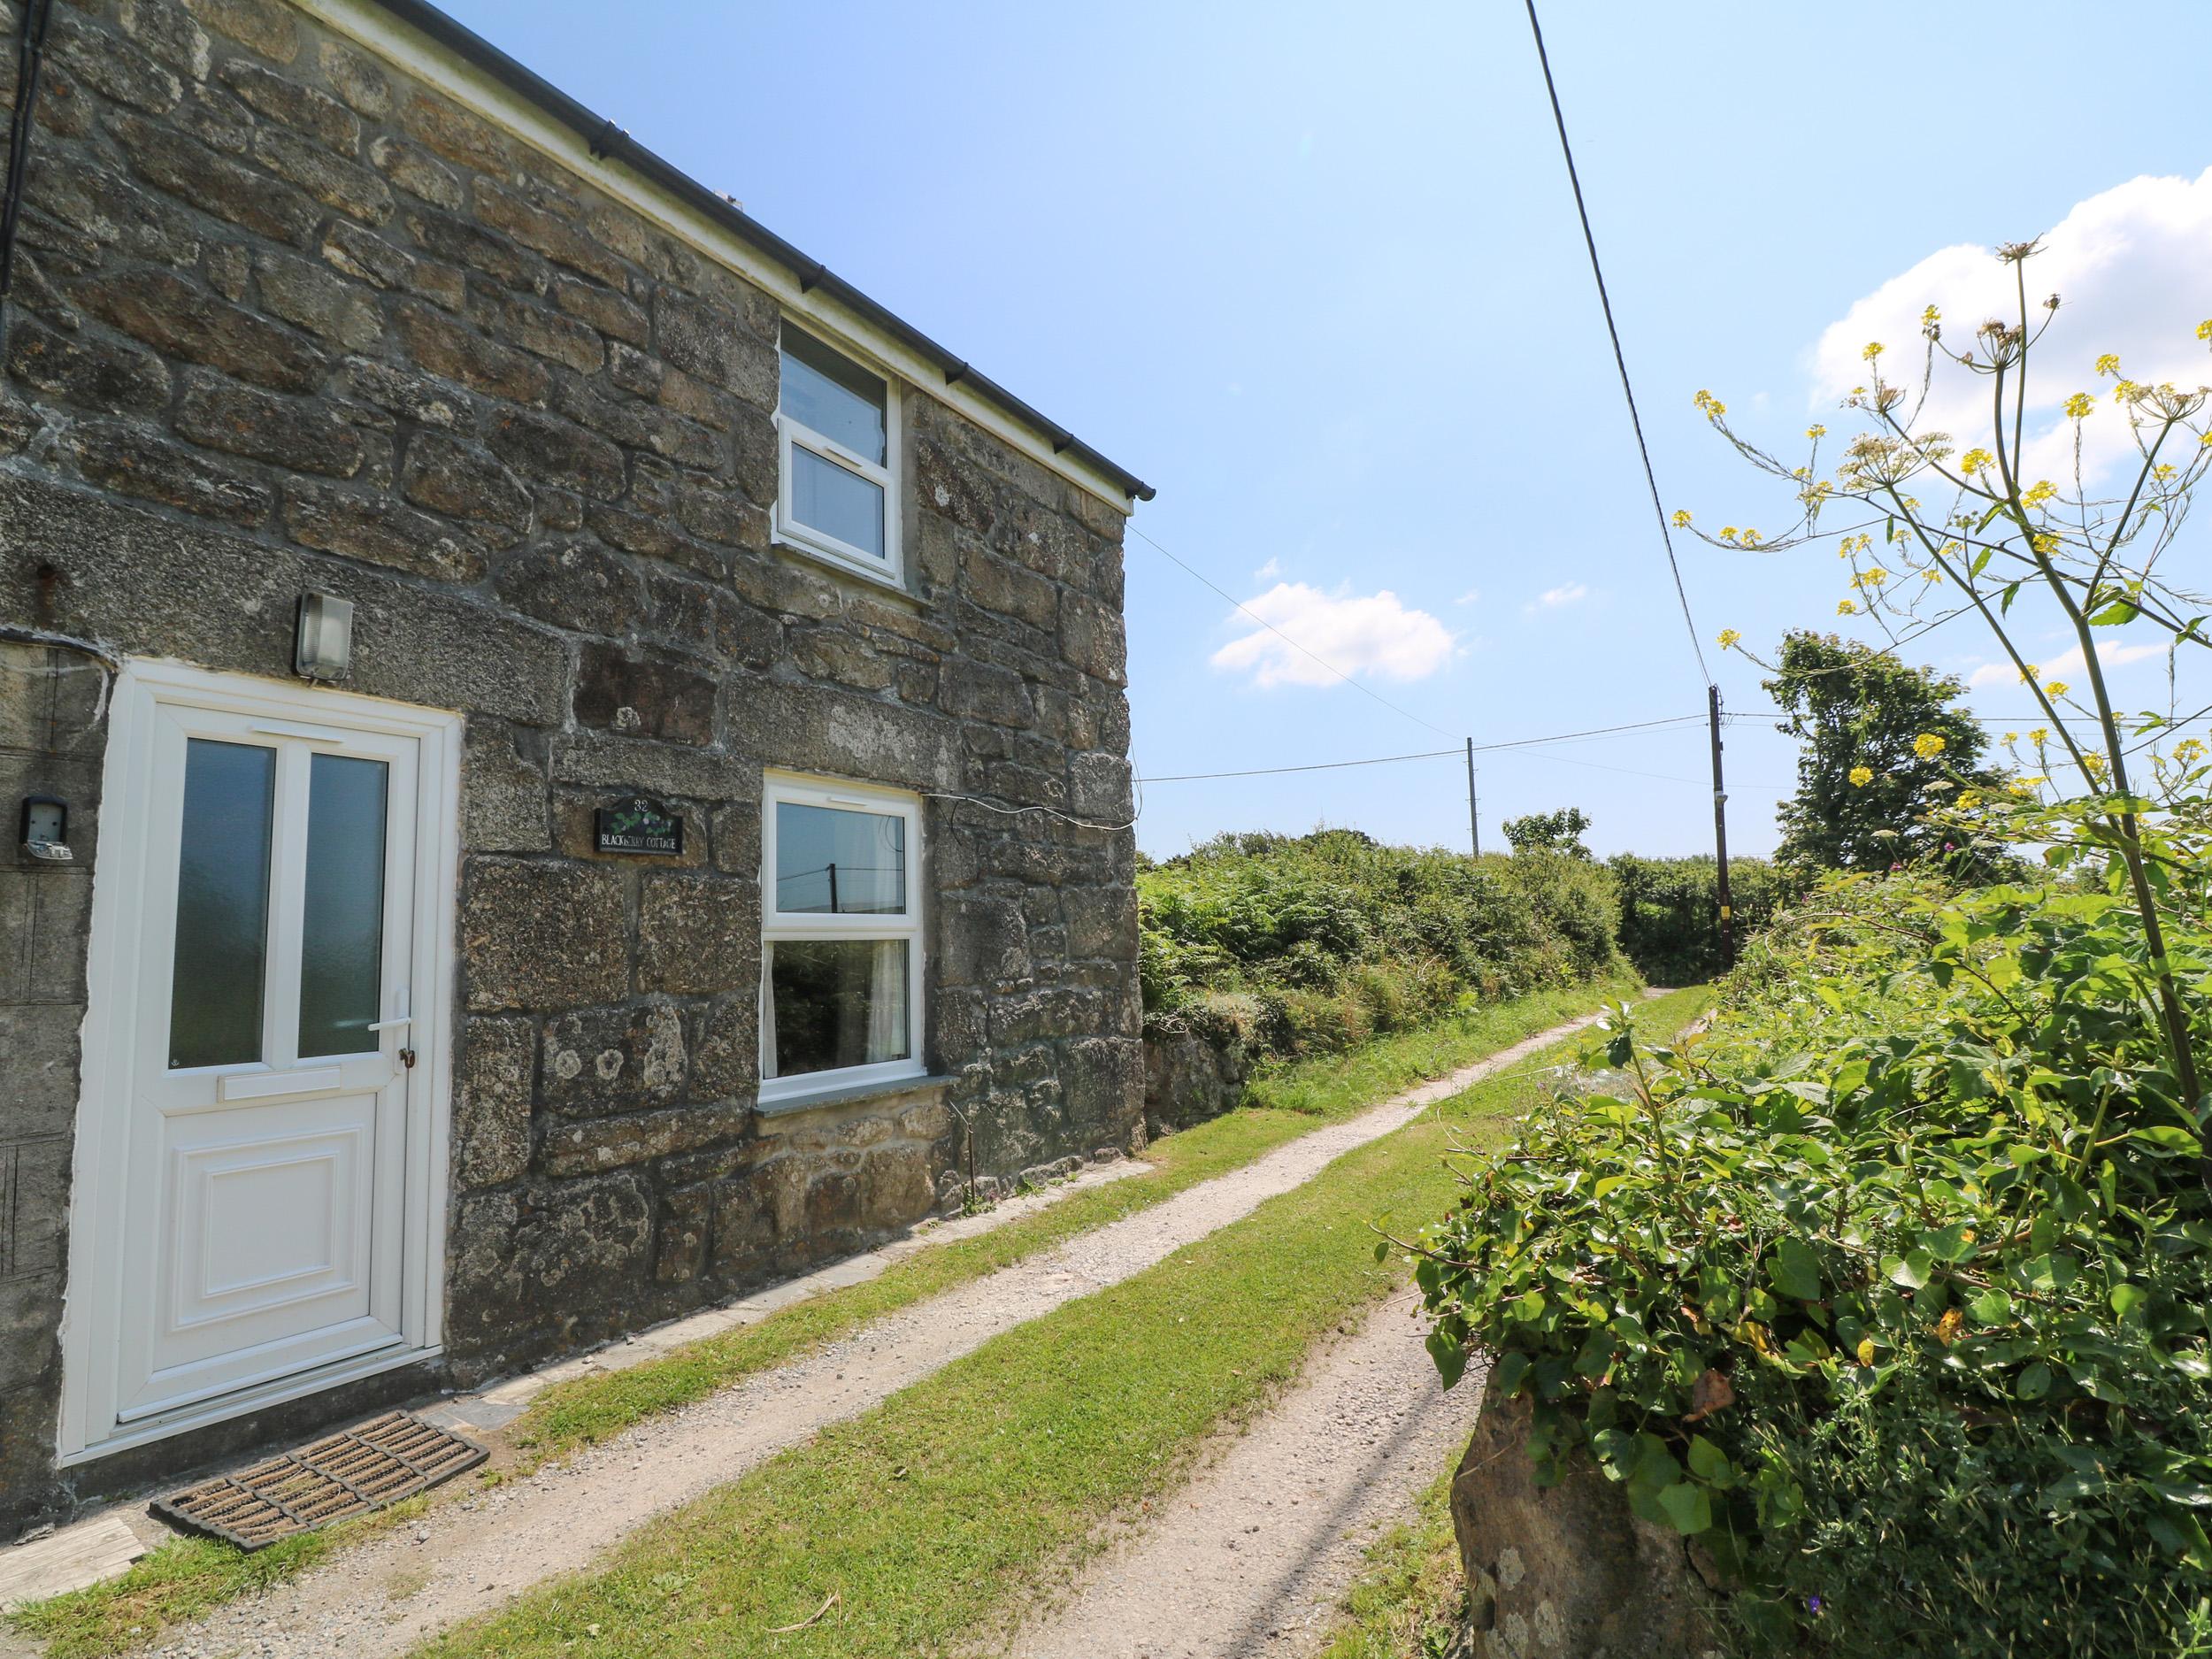 Holiday Cottage Reviews for Blackberry Cottage - Self Catering Property in St Ives, Cornwall inc Scilly